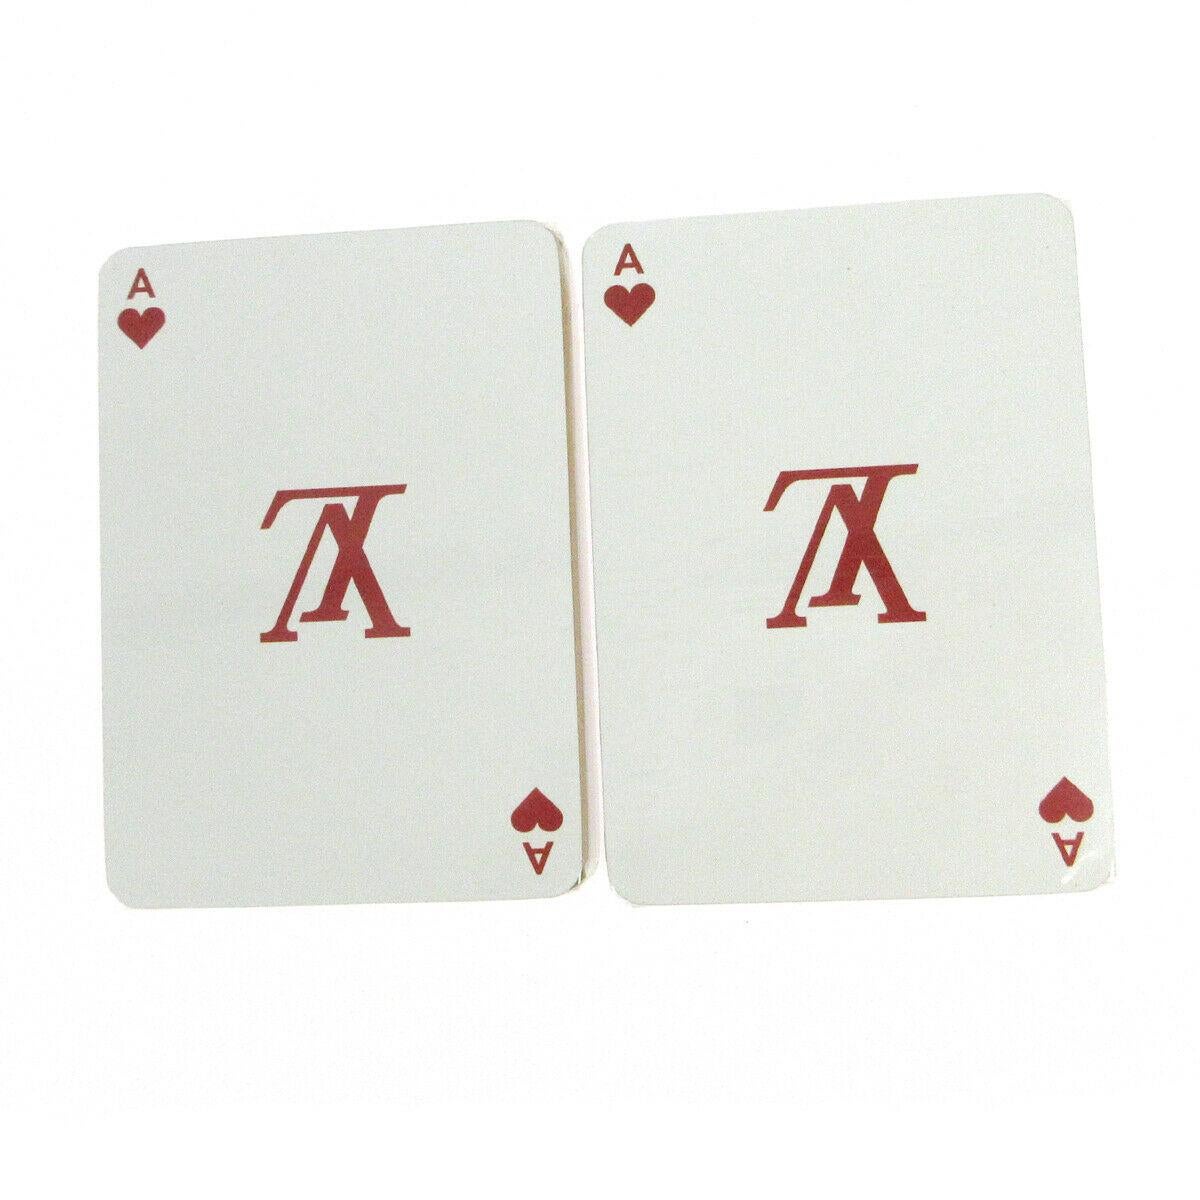 Louis Vuitton Monogram Multicolor White Black Novelty Card Deck of Cards in Box

Measures 2.5